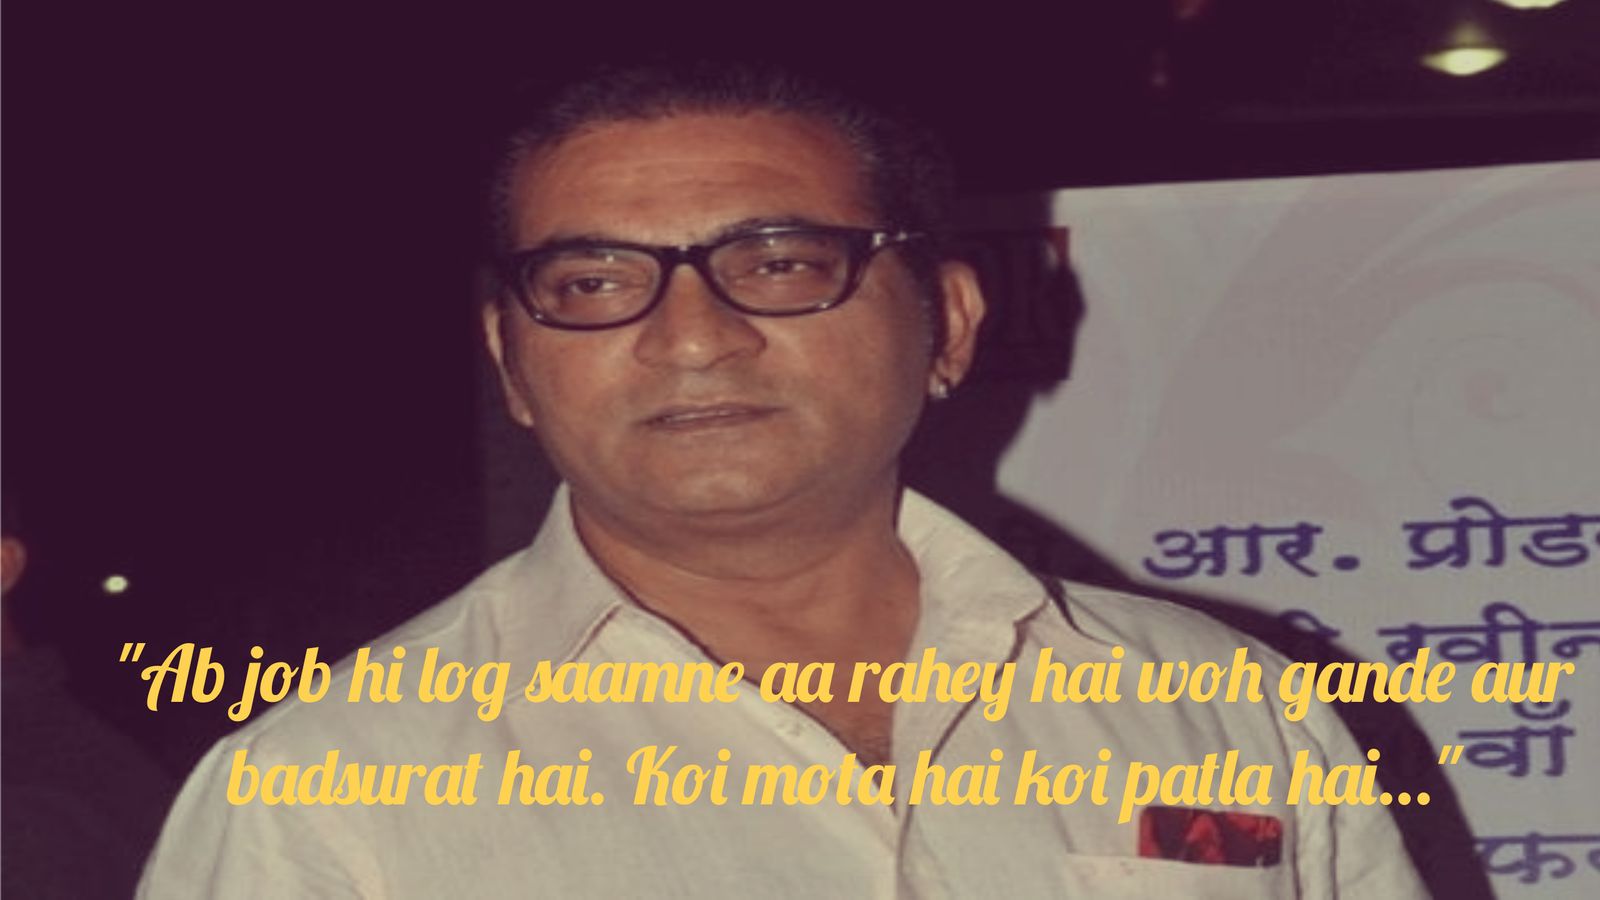  'Gande And Badsurat' Remarks Made By Abhijeet Bhatacharya In The Past Prove He Is The Epitome Of Insensitive